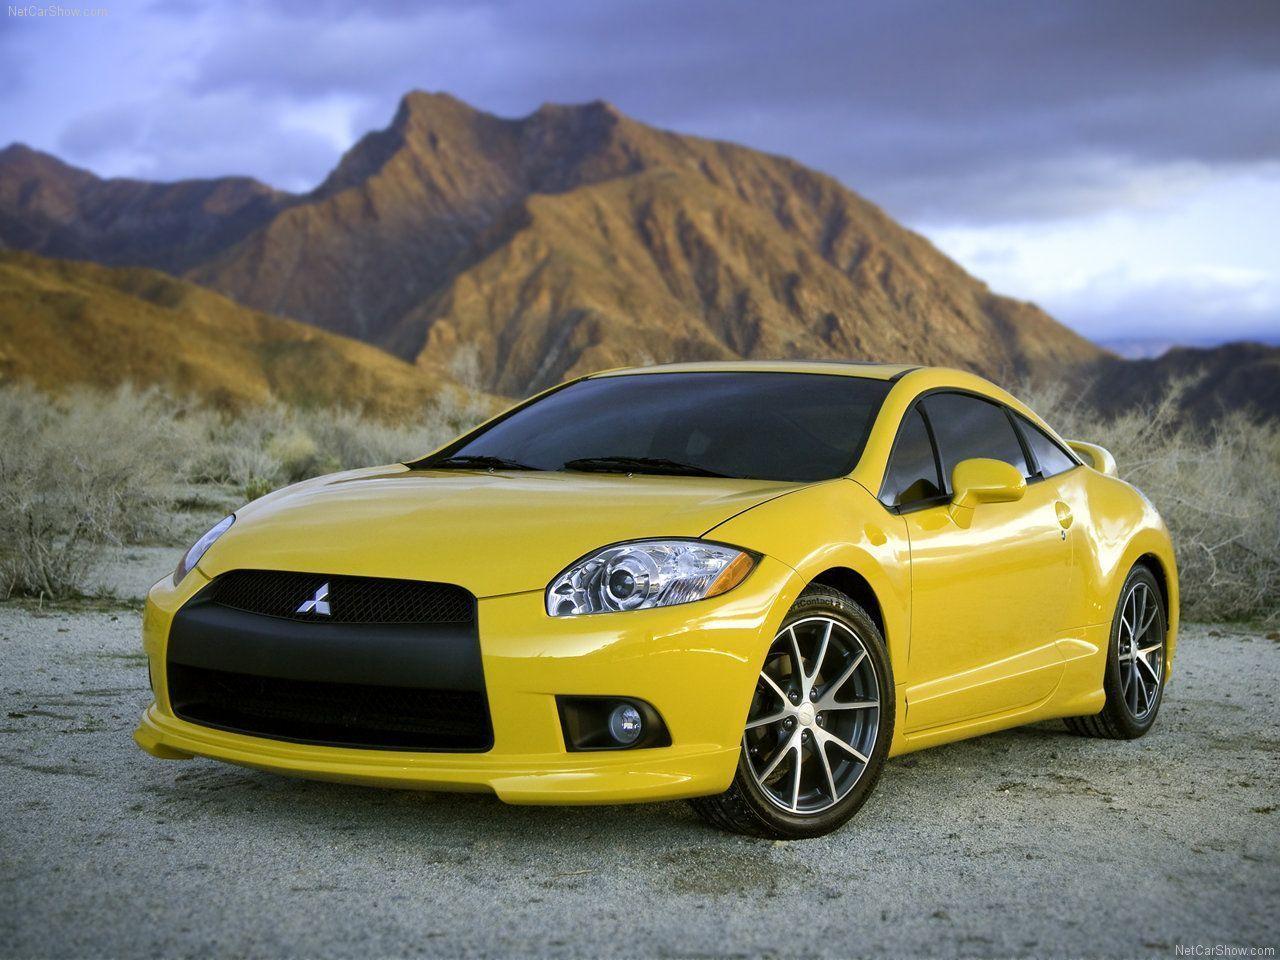 Wallpaper For – Mitsubishi Eclipse Wallpapers